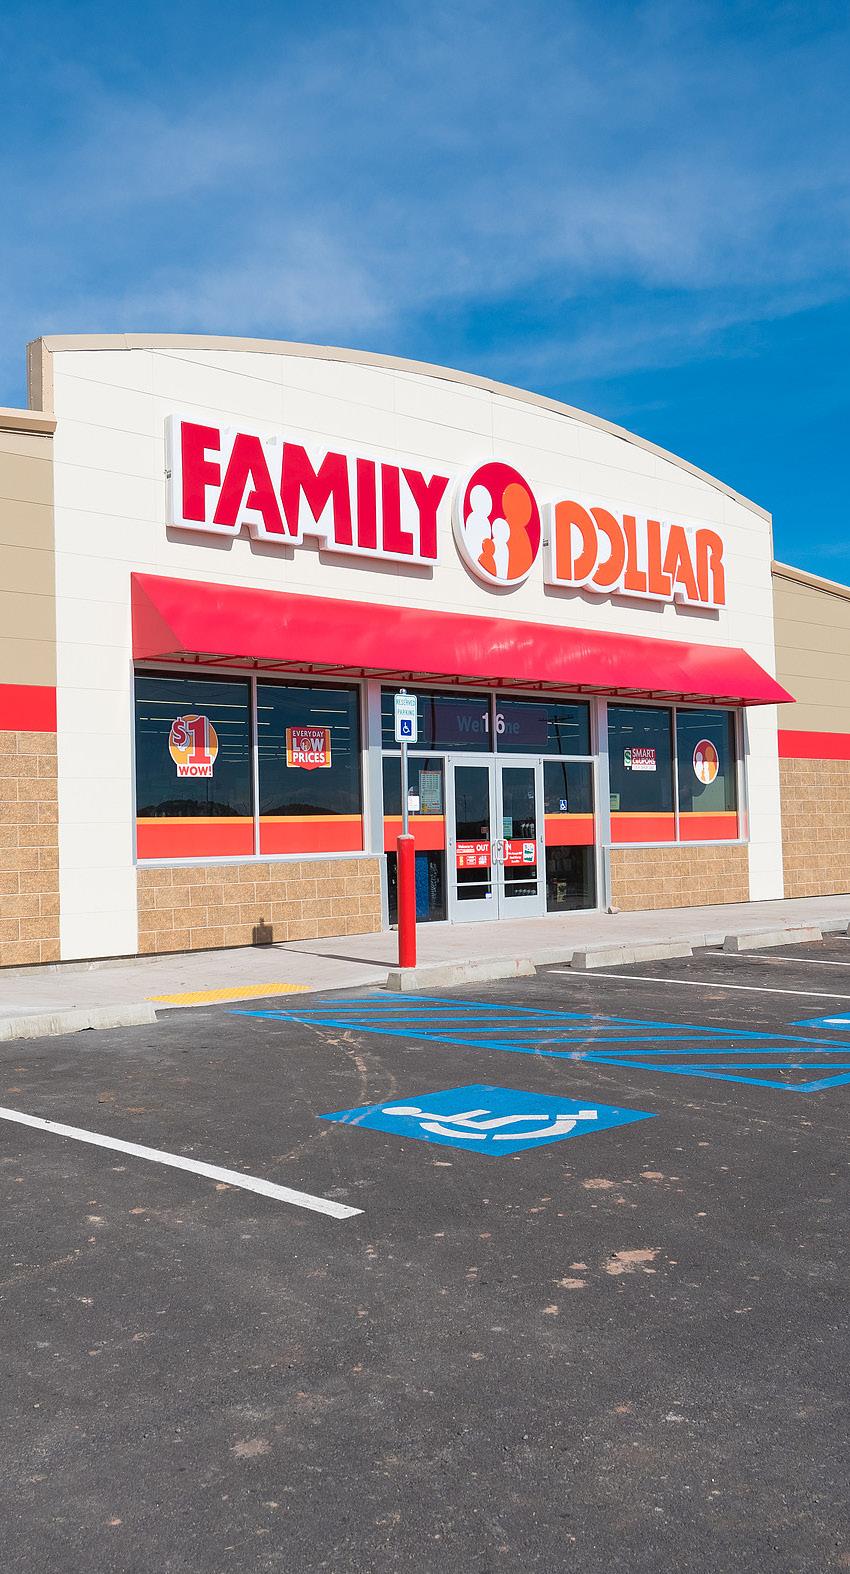 Overview FAMILY DOLLAR 16 CR 5064, CONCHO, AZ 85924 $1,140,368 PRICE 7.60% CAP LEASEABLE SF 8,320 SF LEASE EXPIRATION 11/29/2027 LAND AREA 1.